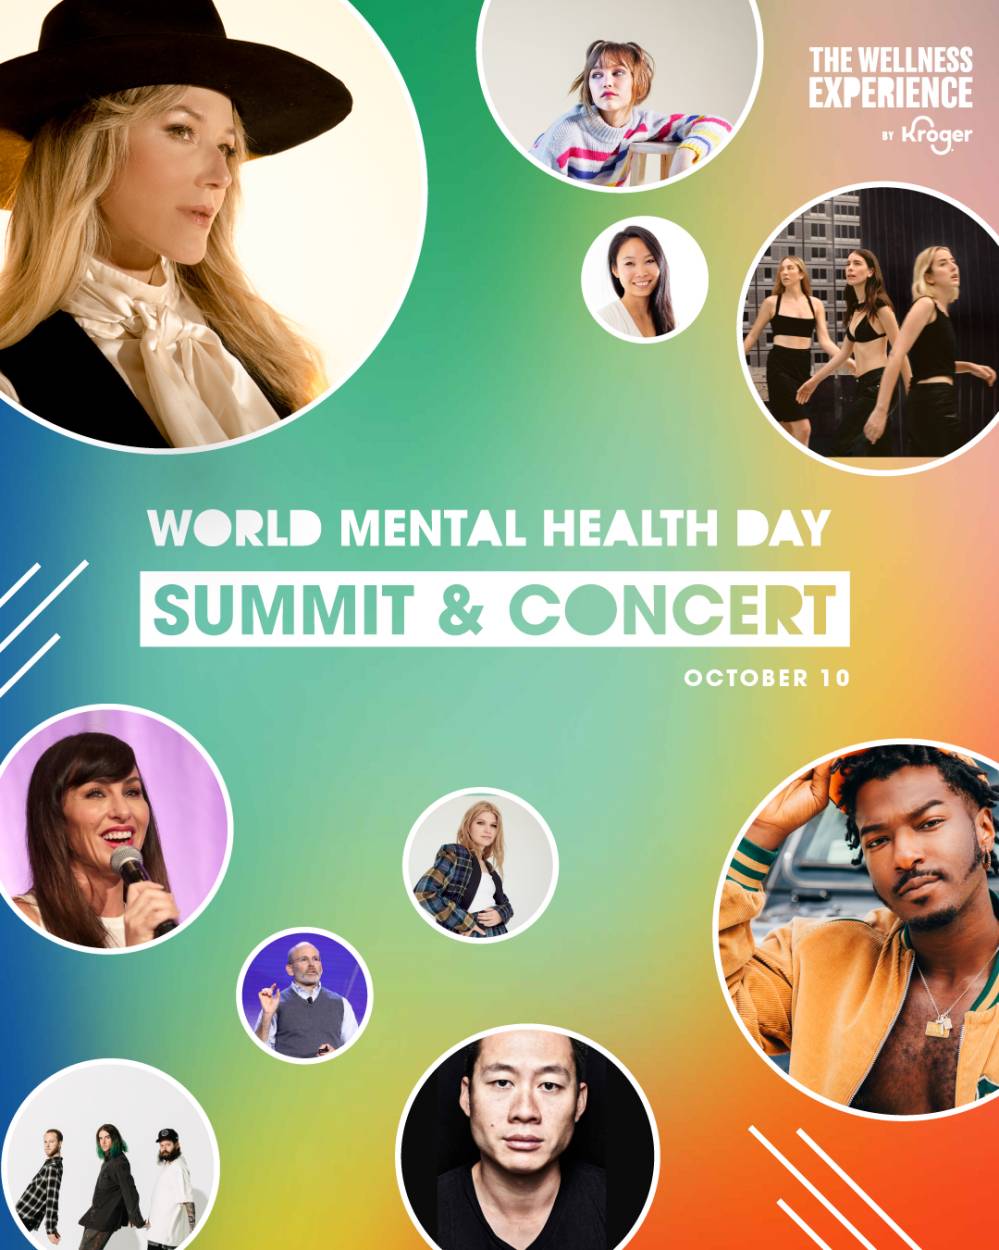 The Wellness Experience Summit Concert Has All-Star Lineup